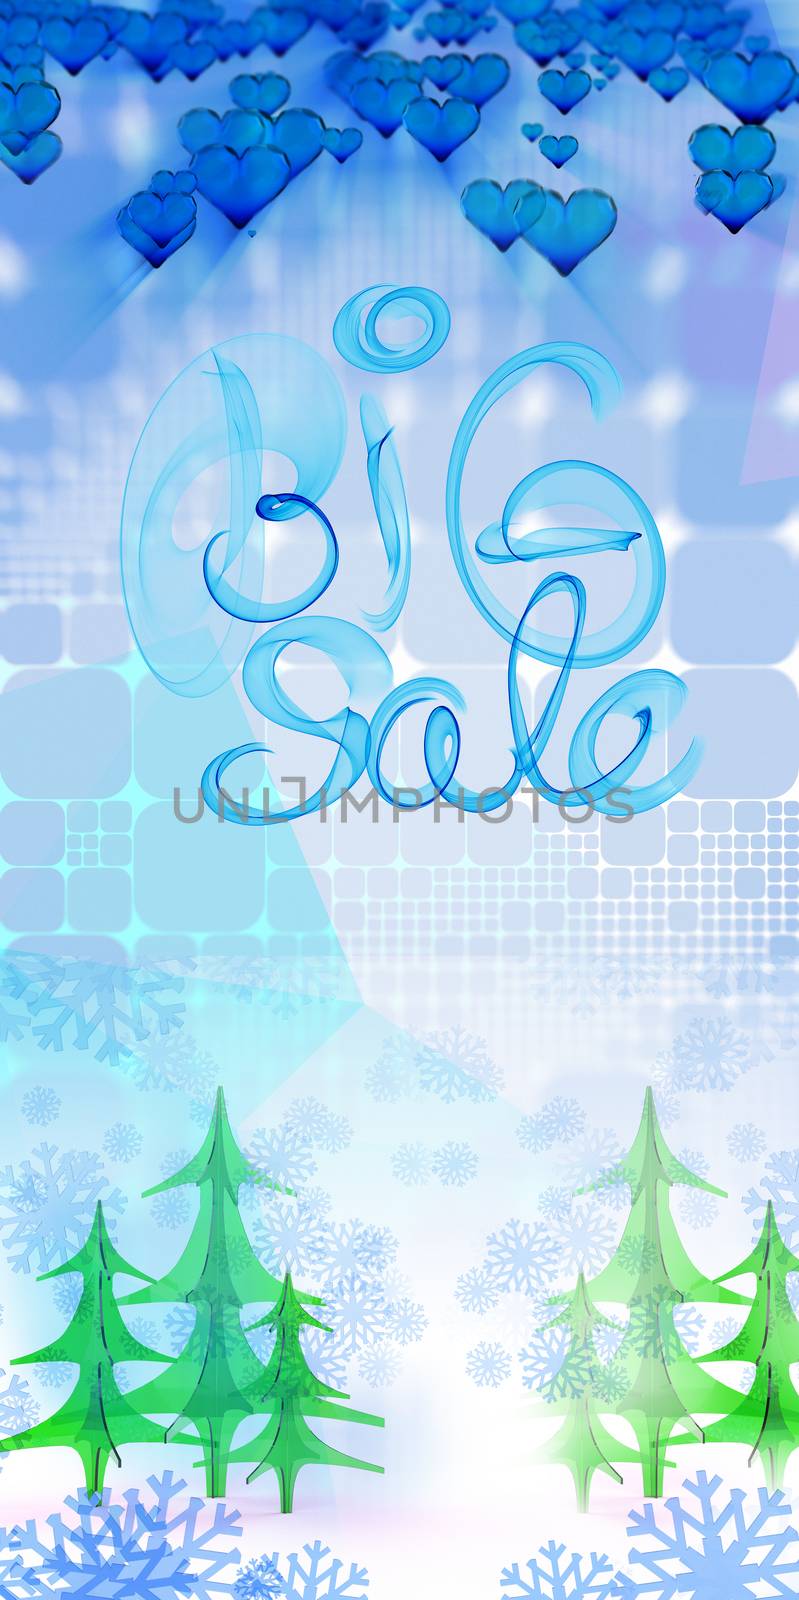 Big sale lettering written with blue smoke or flame on geometric square abstract background with christmas tree and snowflake. 3d illustration by skrotov